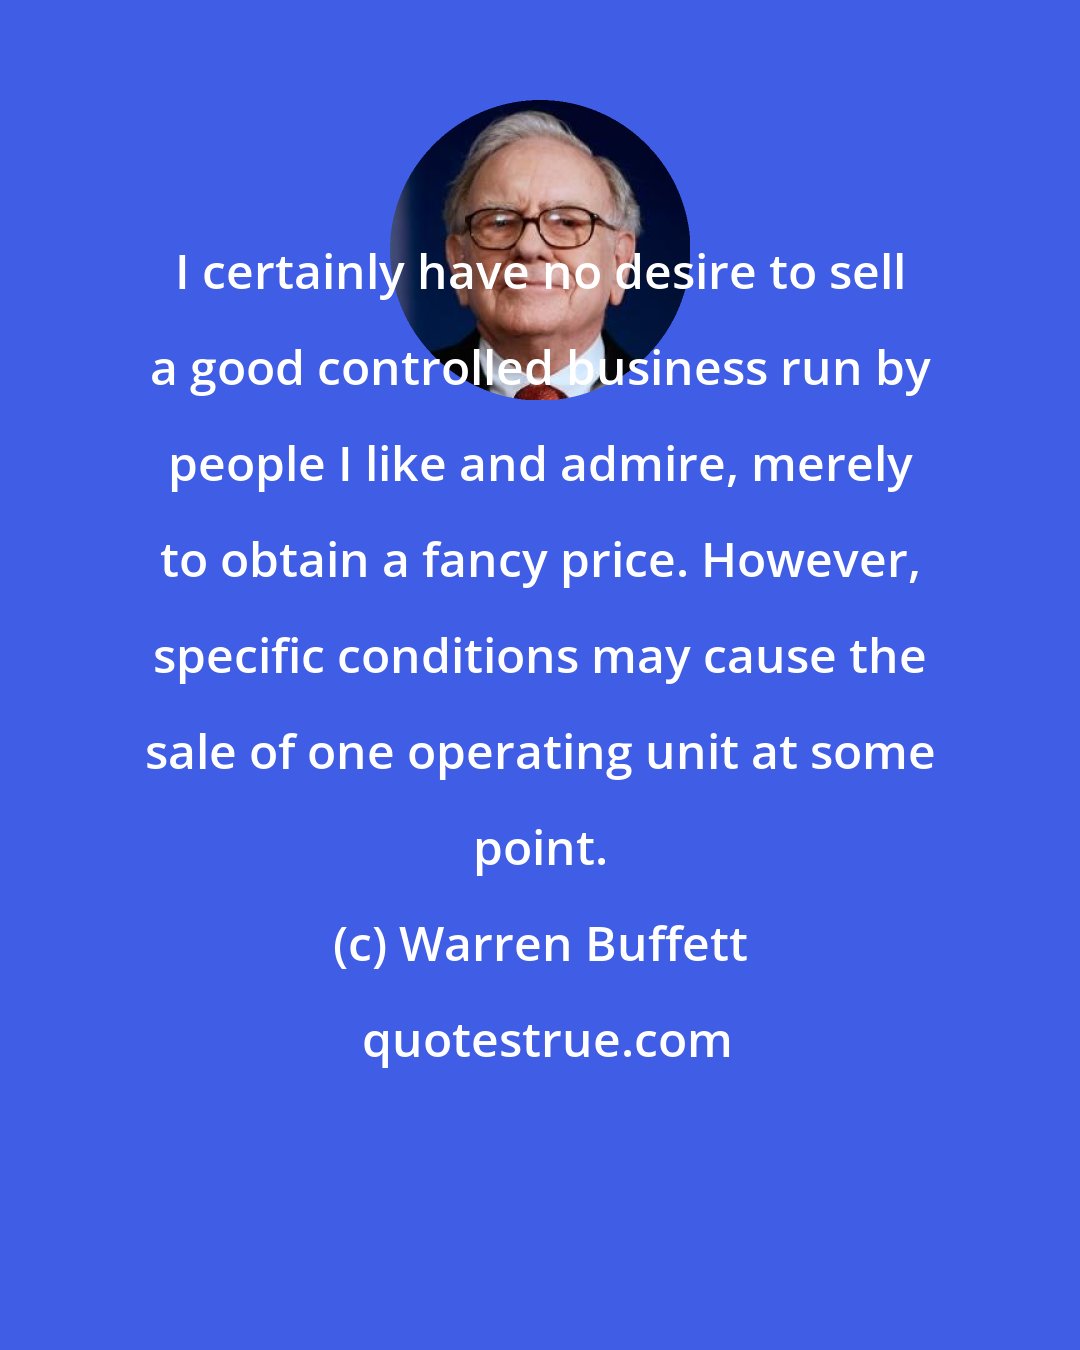 Warren Buffett: I certainly have no desire to sell a good controlled business run by people I like and admire, merely to obtain a fancy price. However, specific conditions may cause the sale of one operating unit at some point.